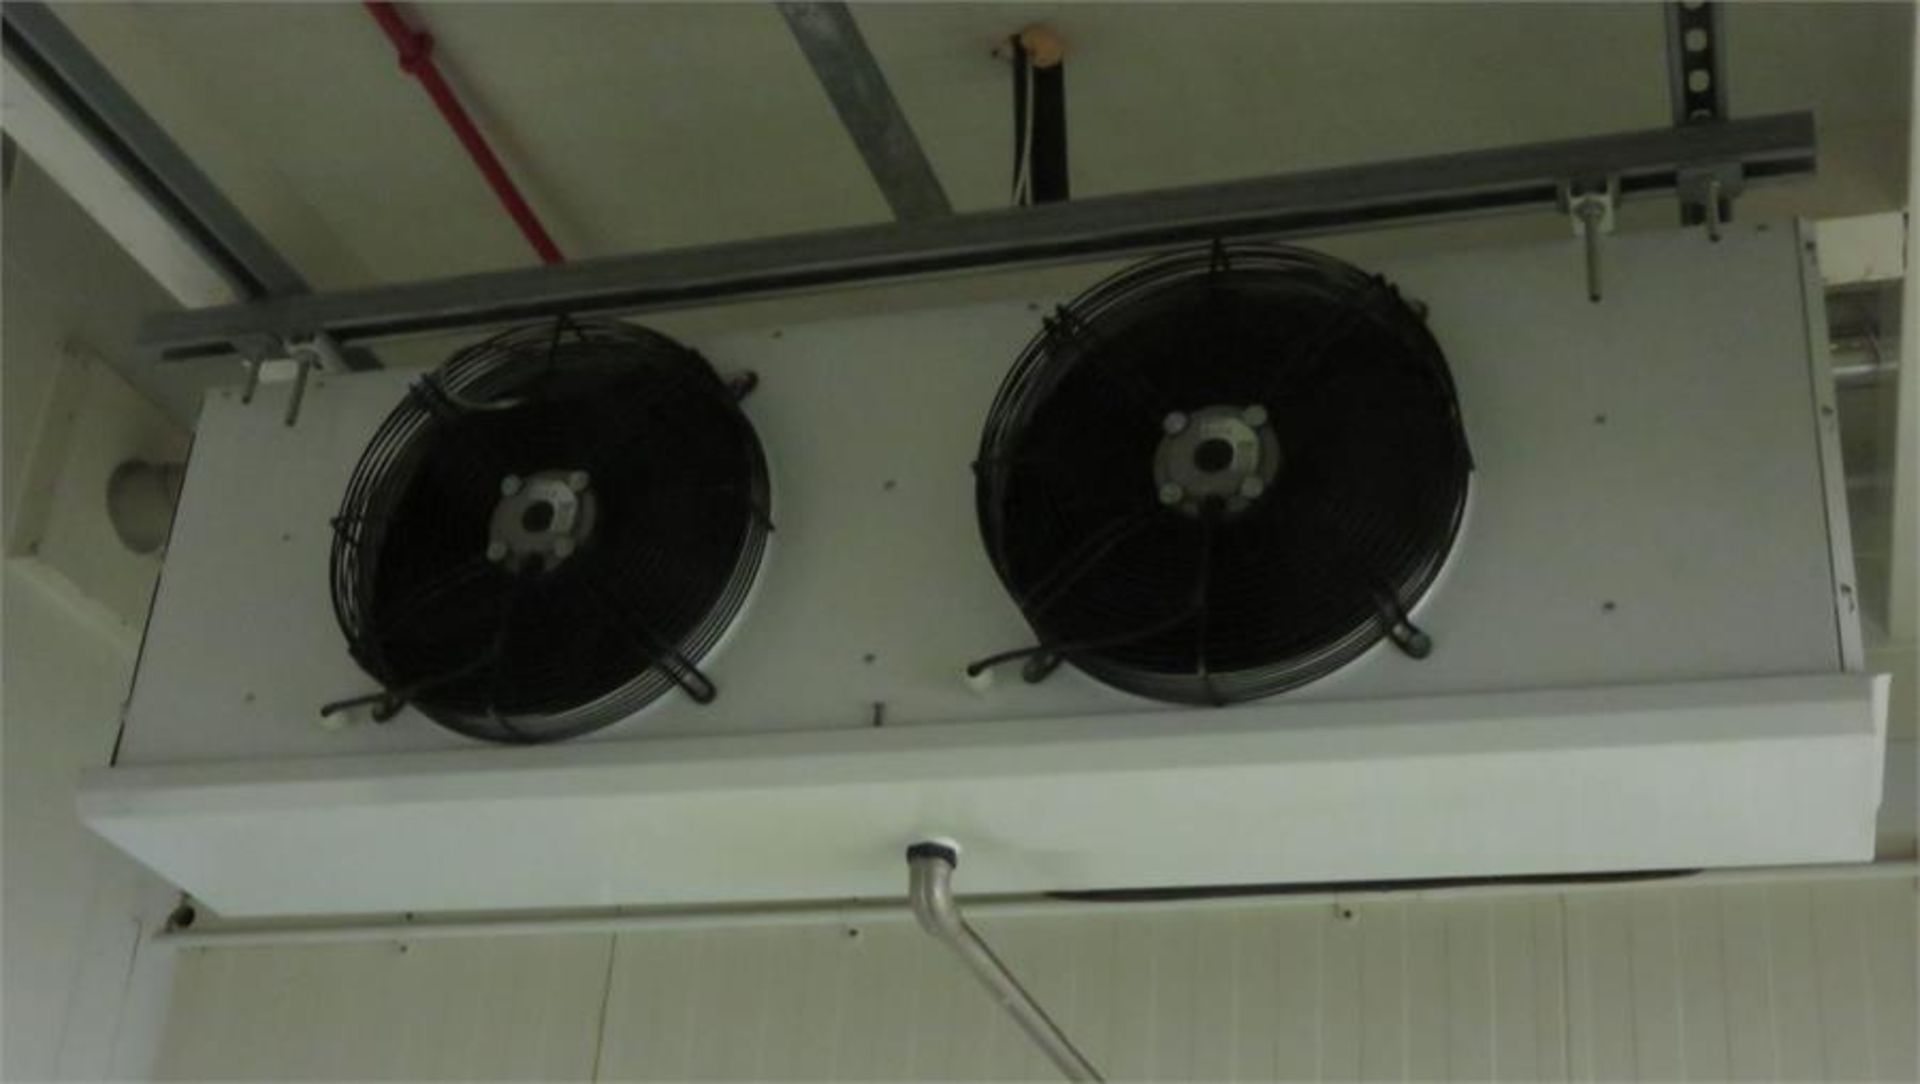 FAN EVAPORATORS AND CONDENSERS - Image 3 of 7